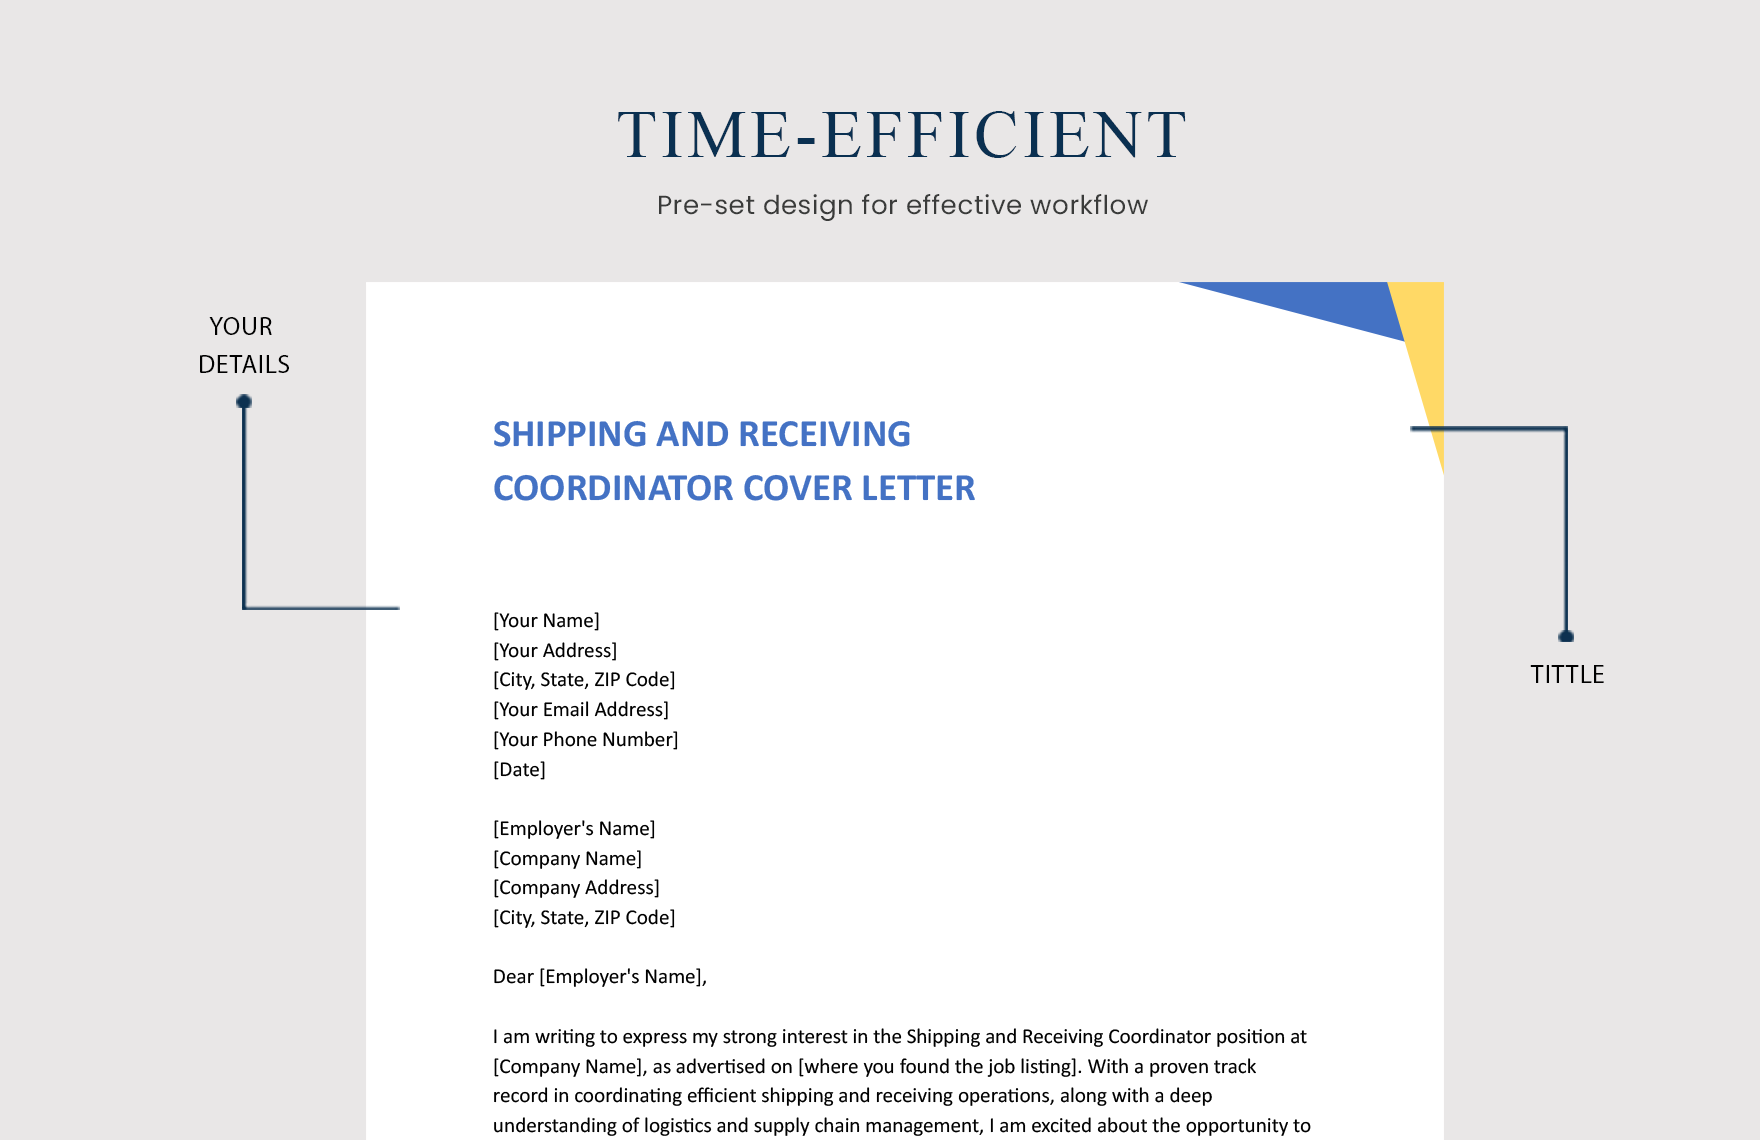 Shipping And Receiving Coordinator Cover Letter